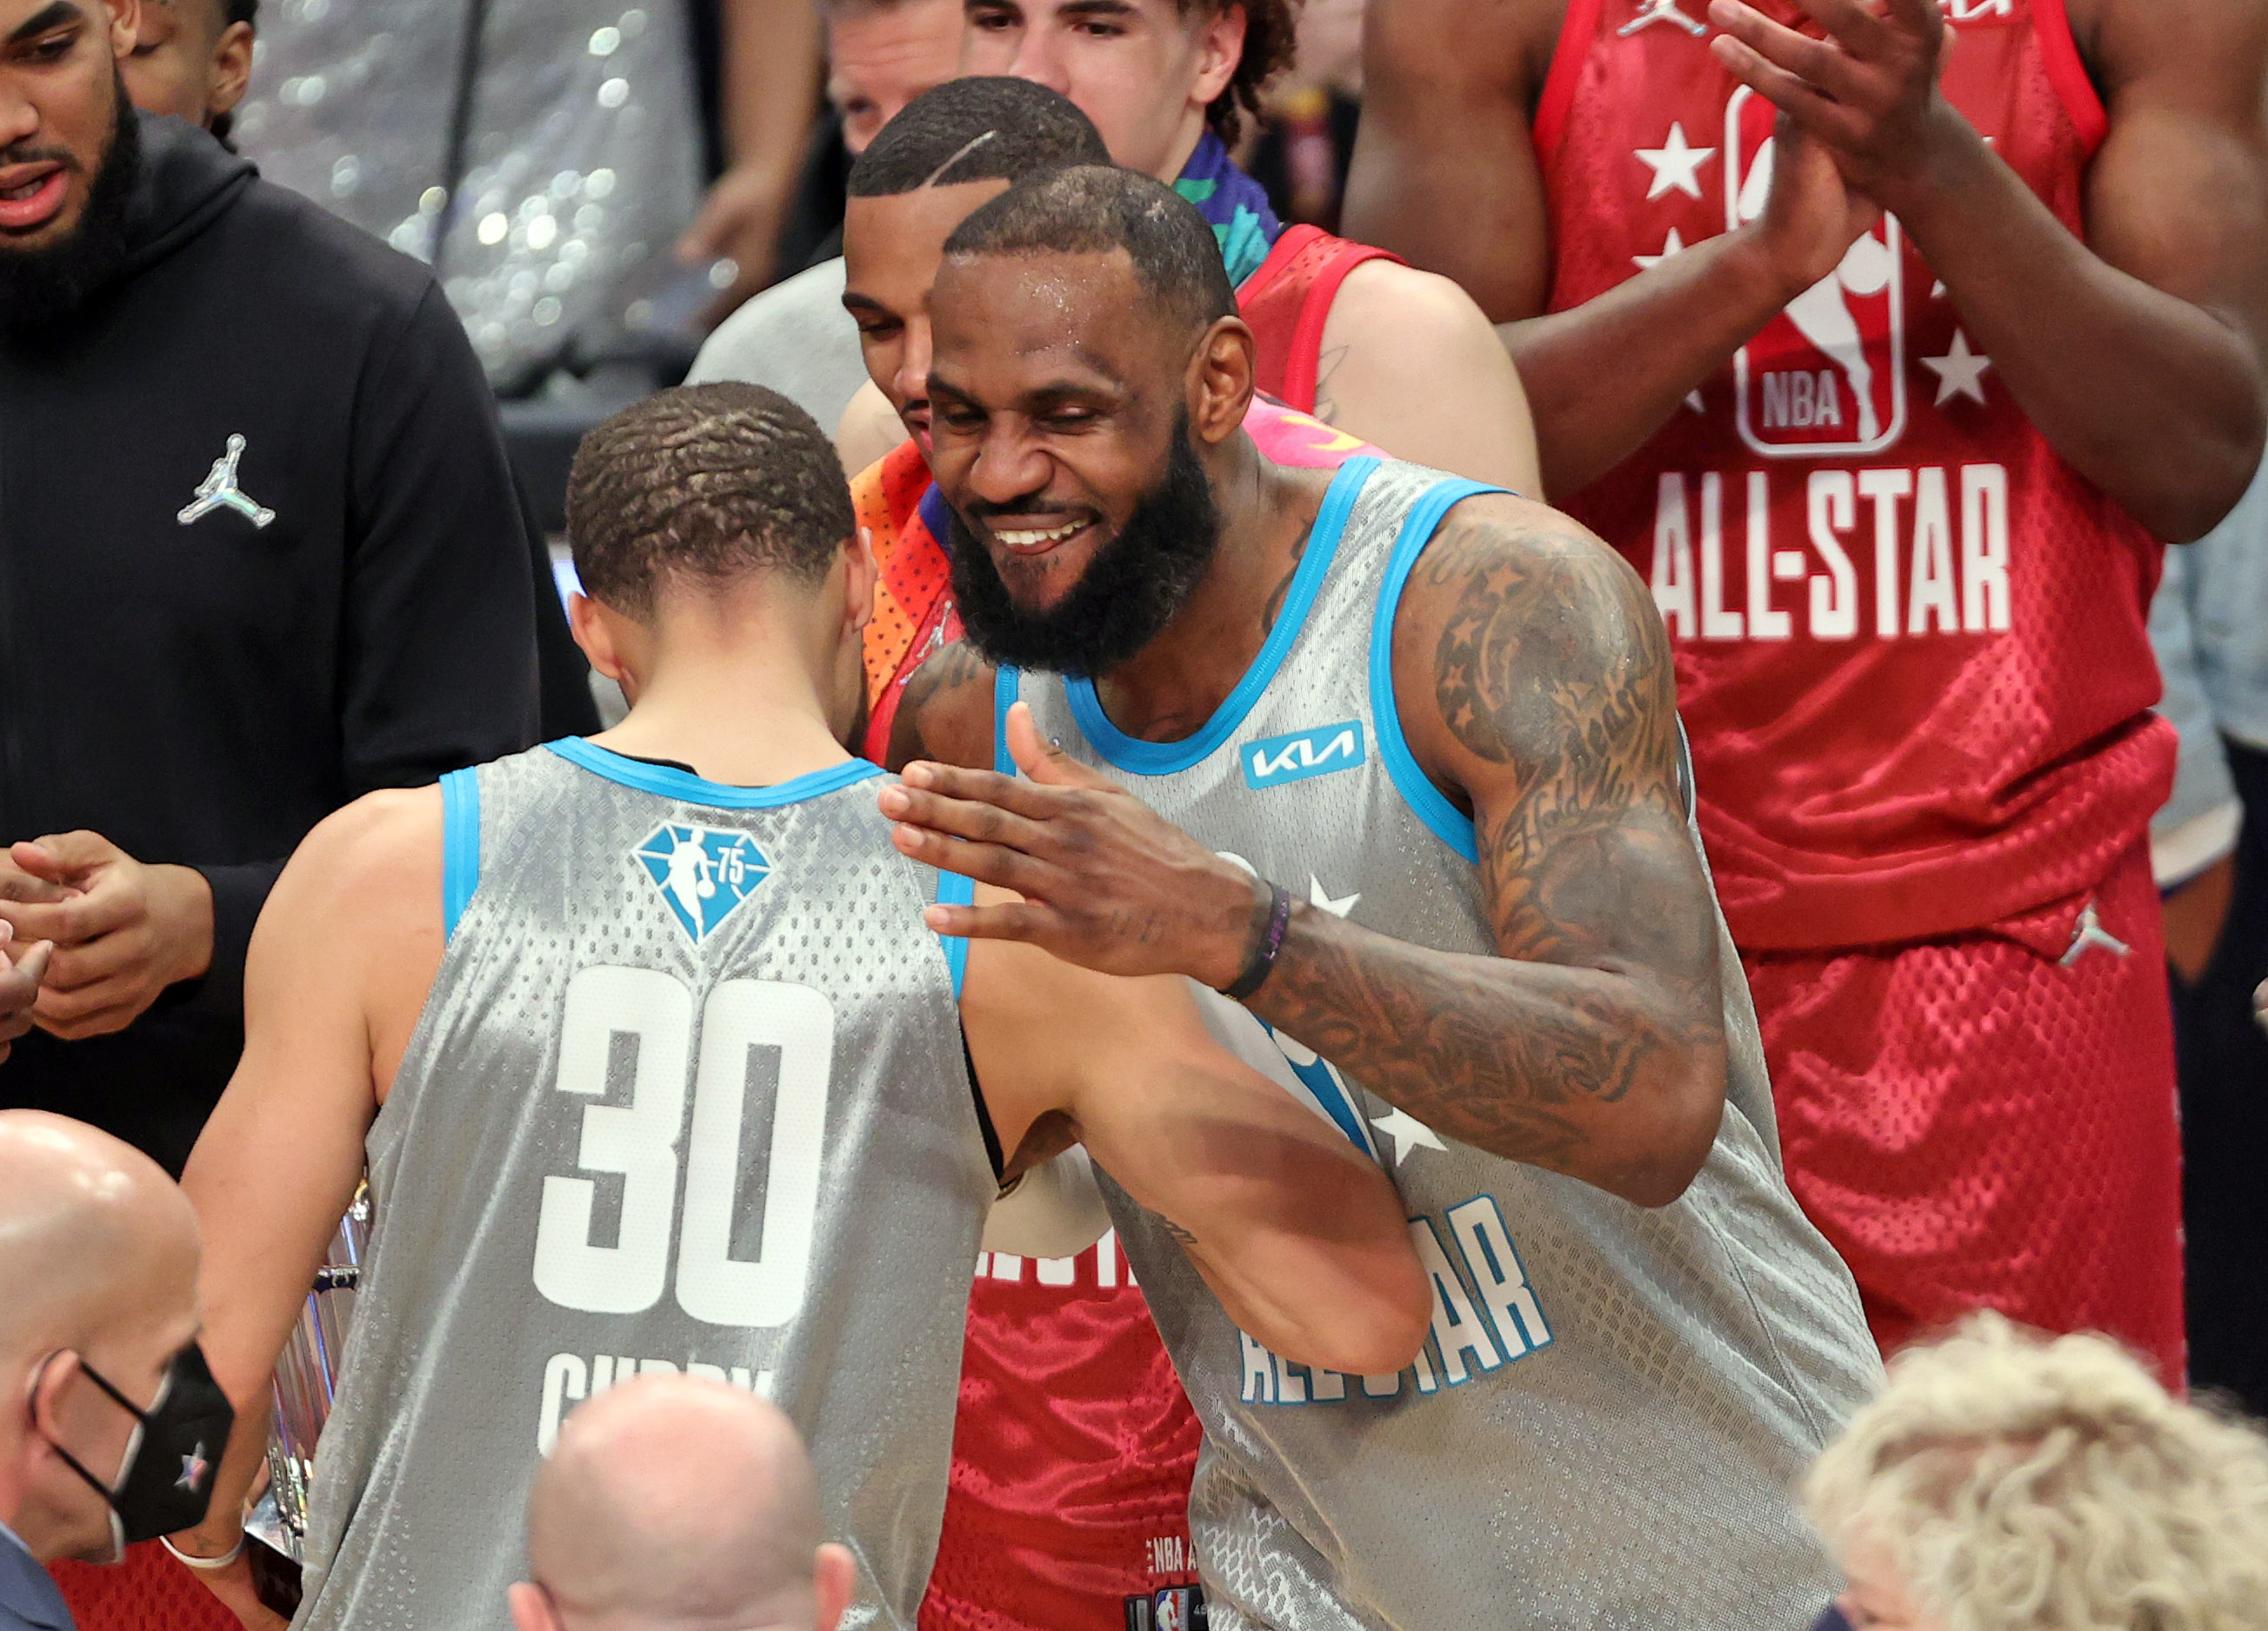 2022 NBA All-Star Game: Stephen Curry sets a record, and LeBron